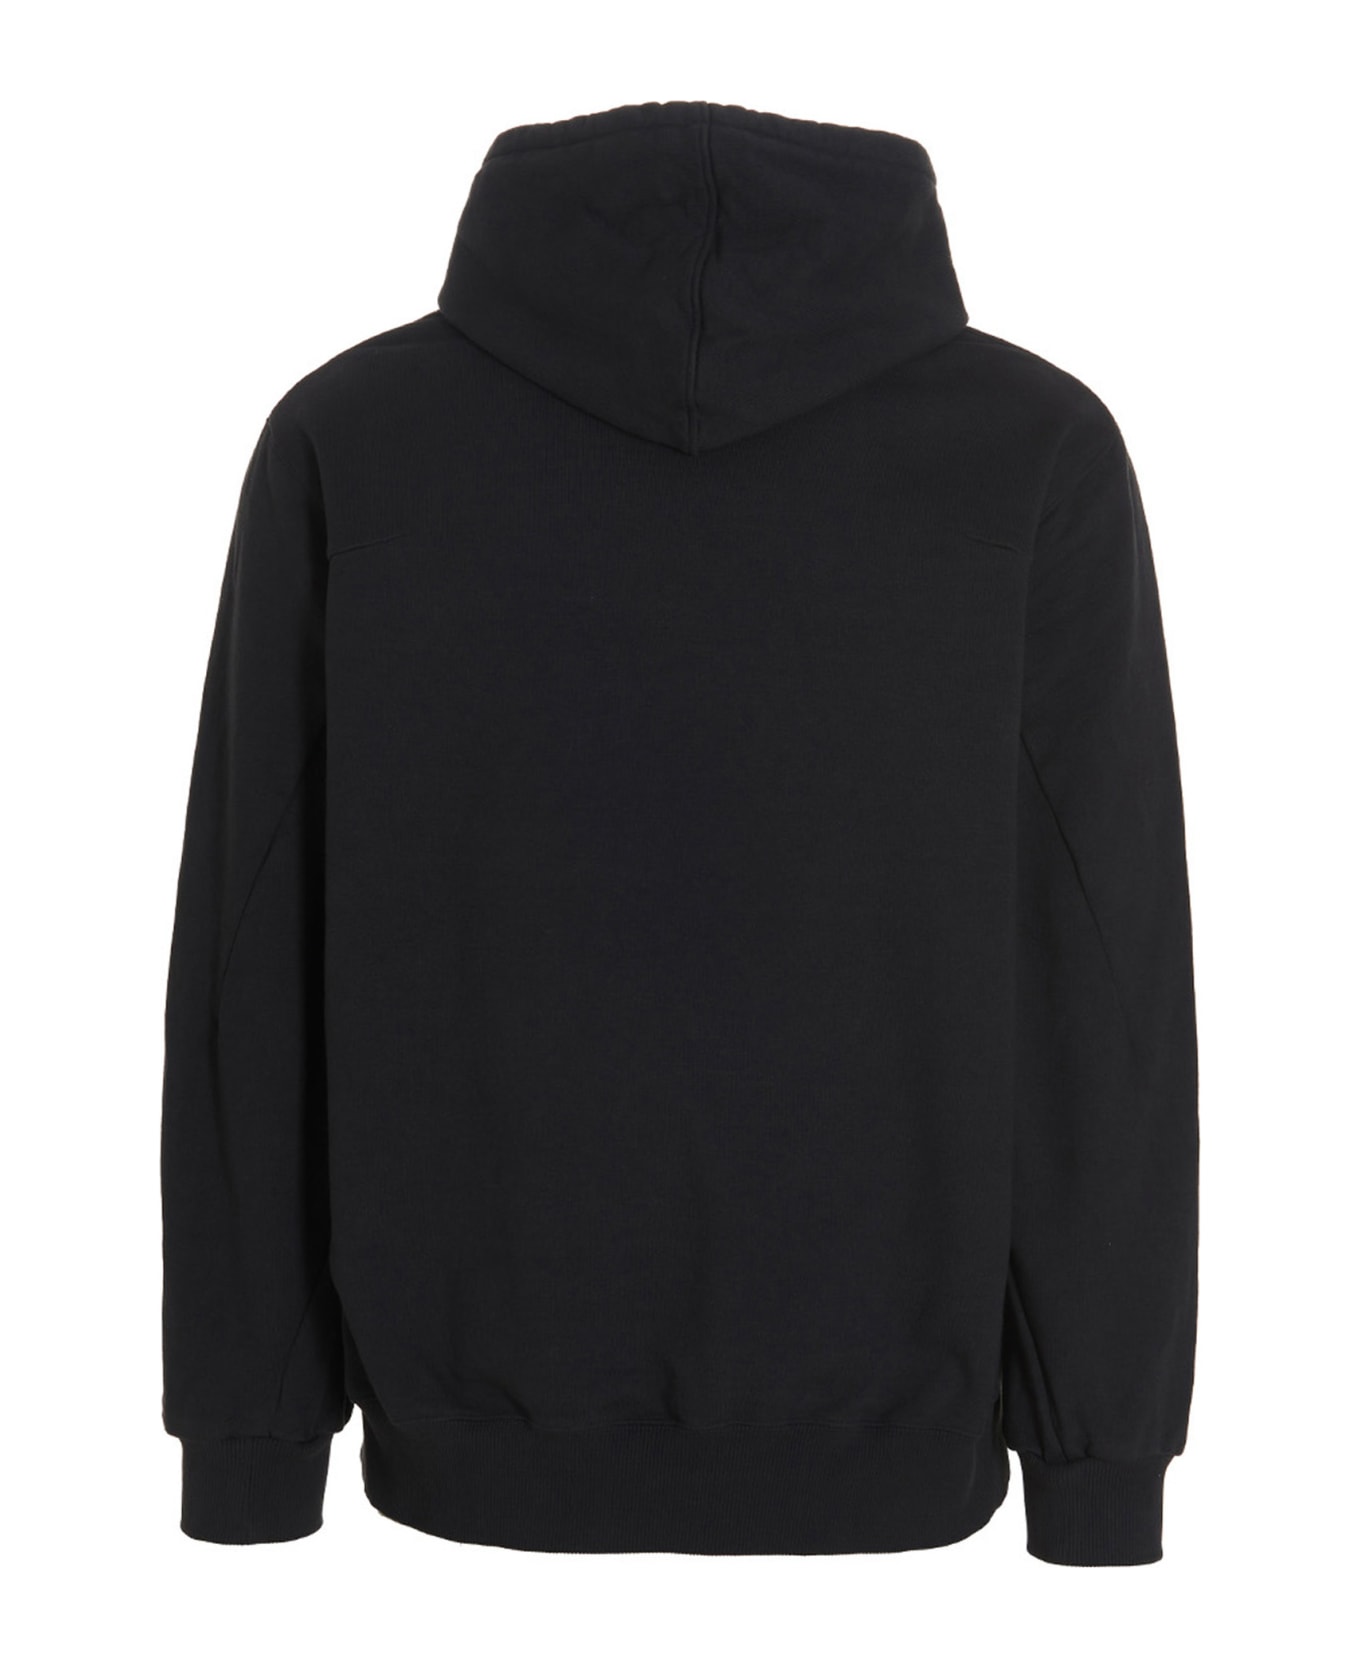 doublet 'polyurethane Embroidery' Hoodie - Black  